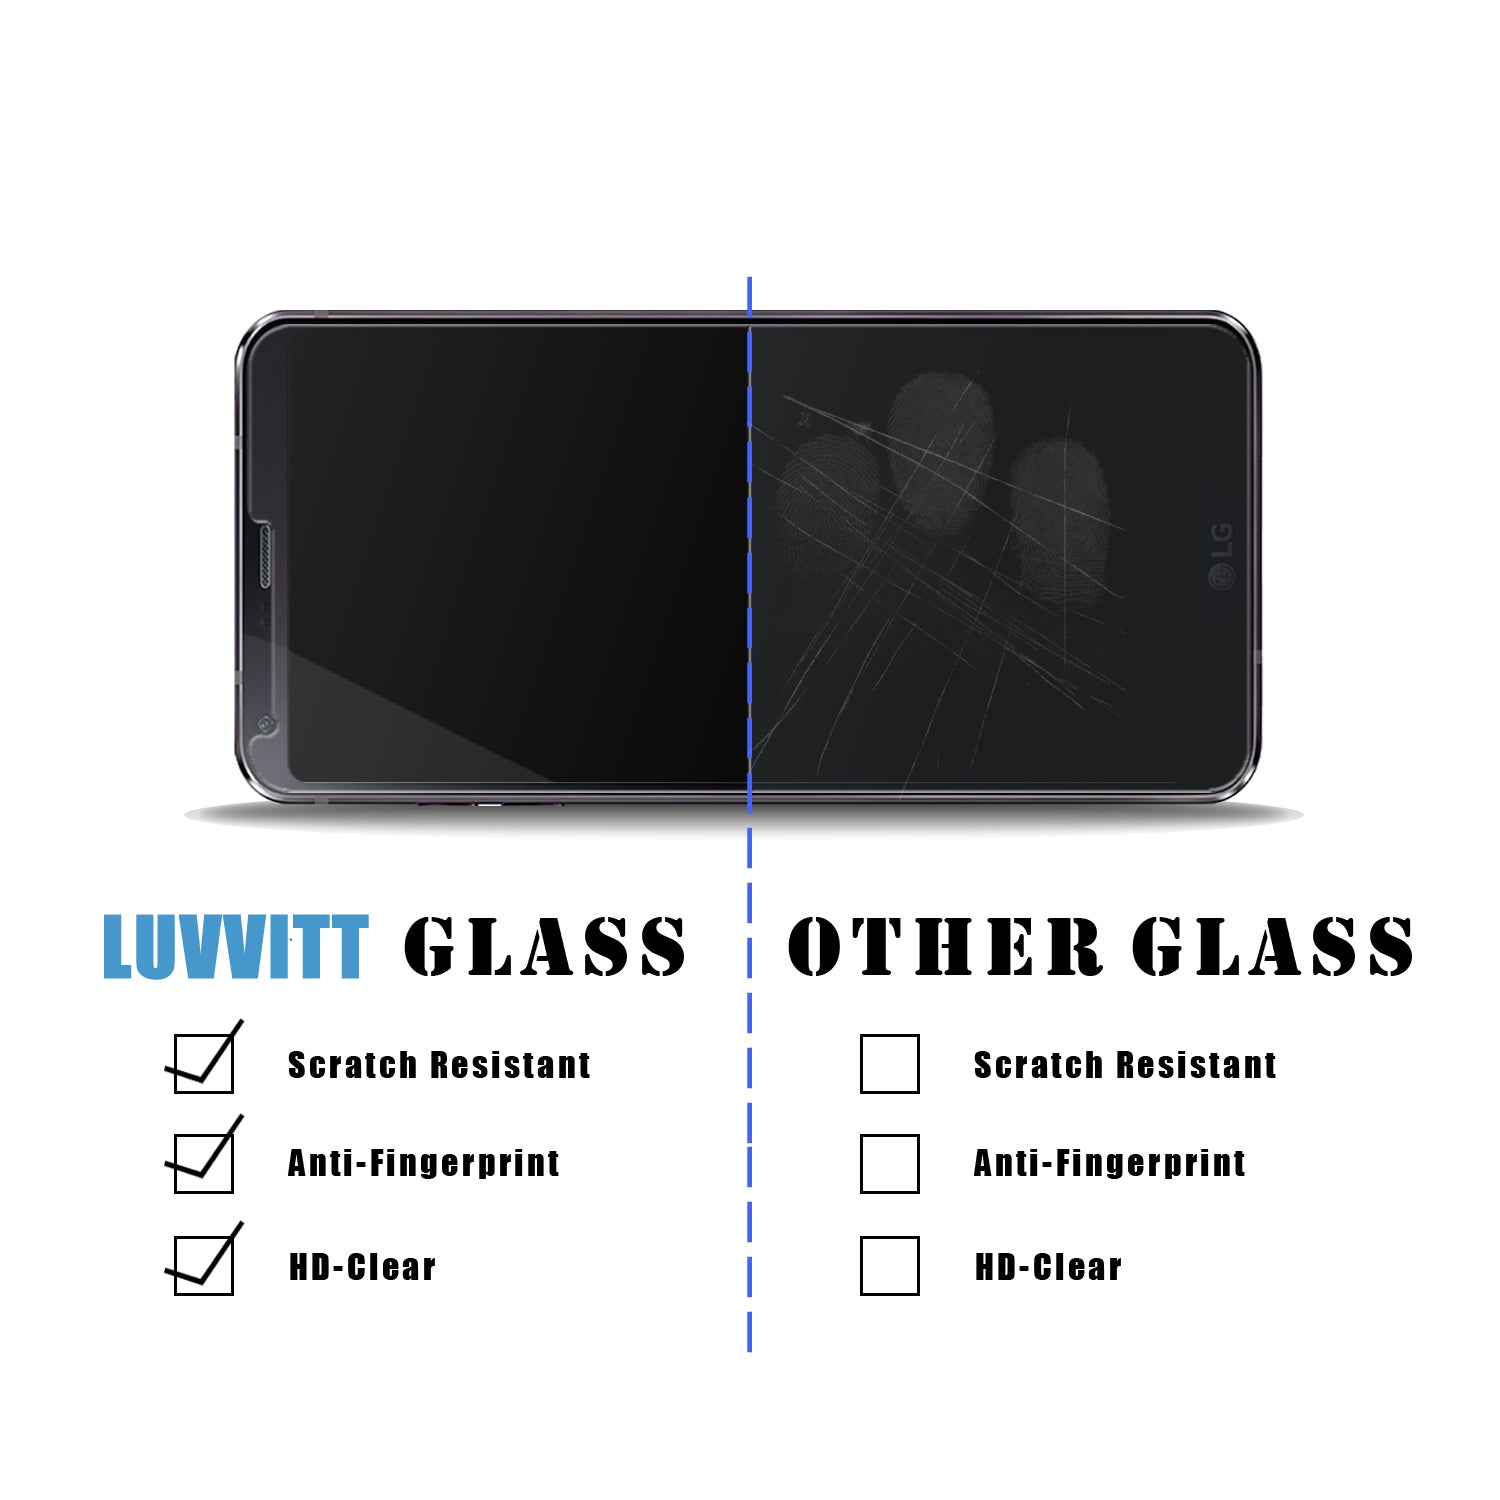 LUVVITT TEMPERED GLASS Screen Protector for LG G6 - Crystal Clear